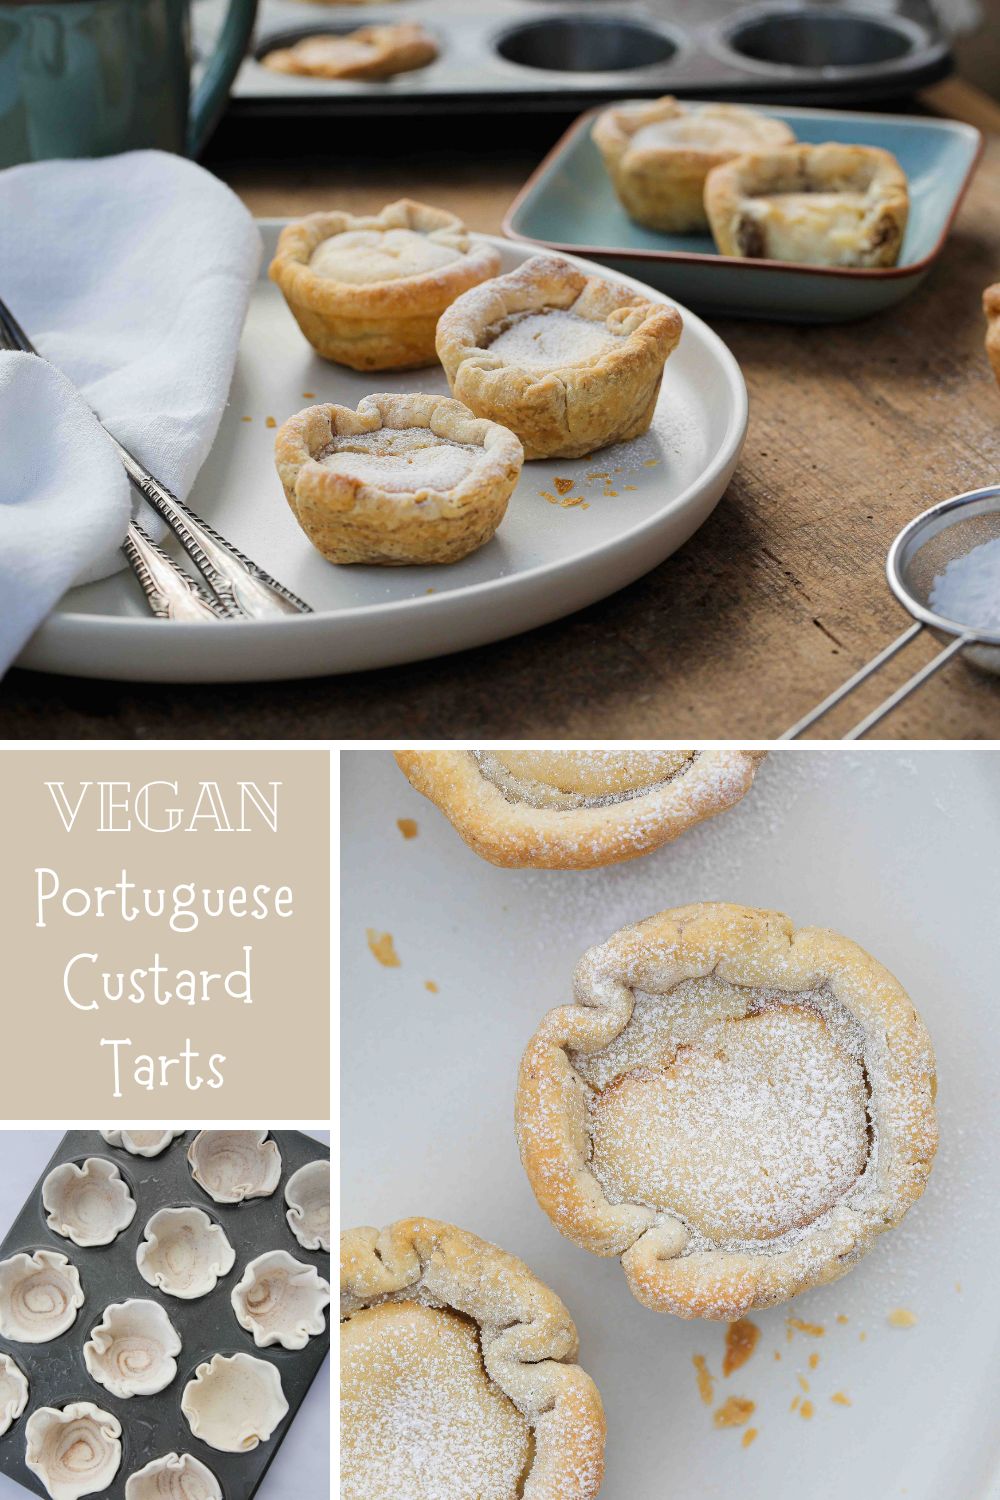 No plane ticket required for these Portuguese custard tarts! Creamy vegan custard is housed in a crisp puff pastry shell before being baked to golden perfection. Recipe in thecookandhim.com | #vegancustard #portuguesecustardtart #eggfreecustard #pasteldenata #tofurecipes